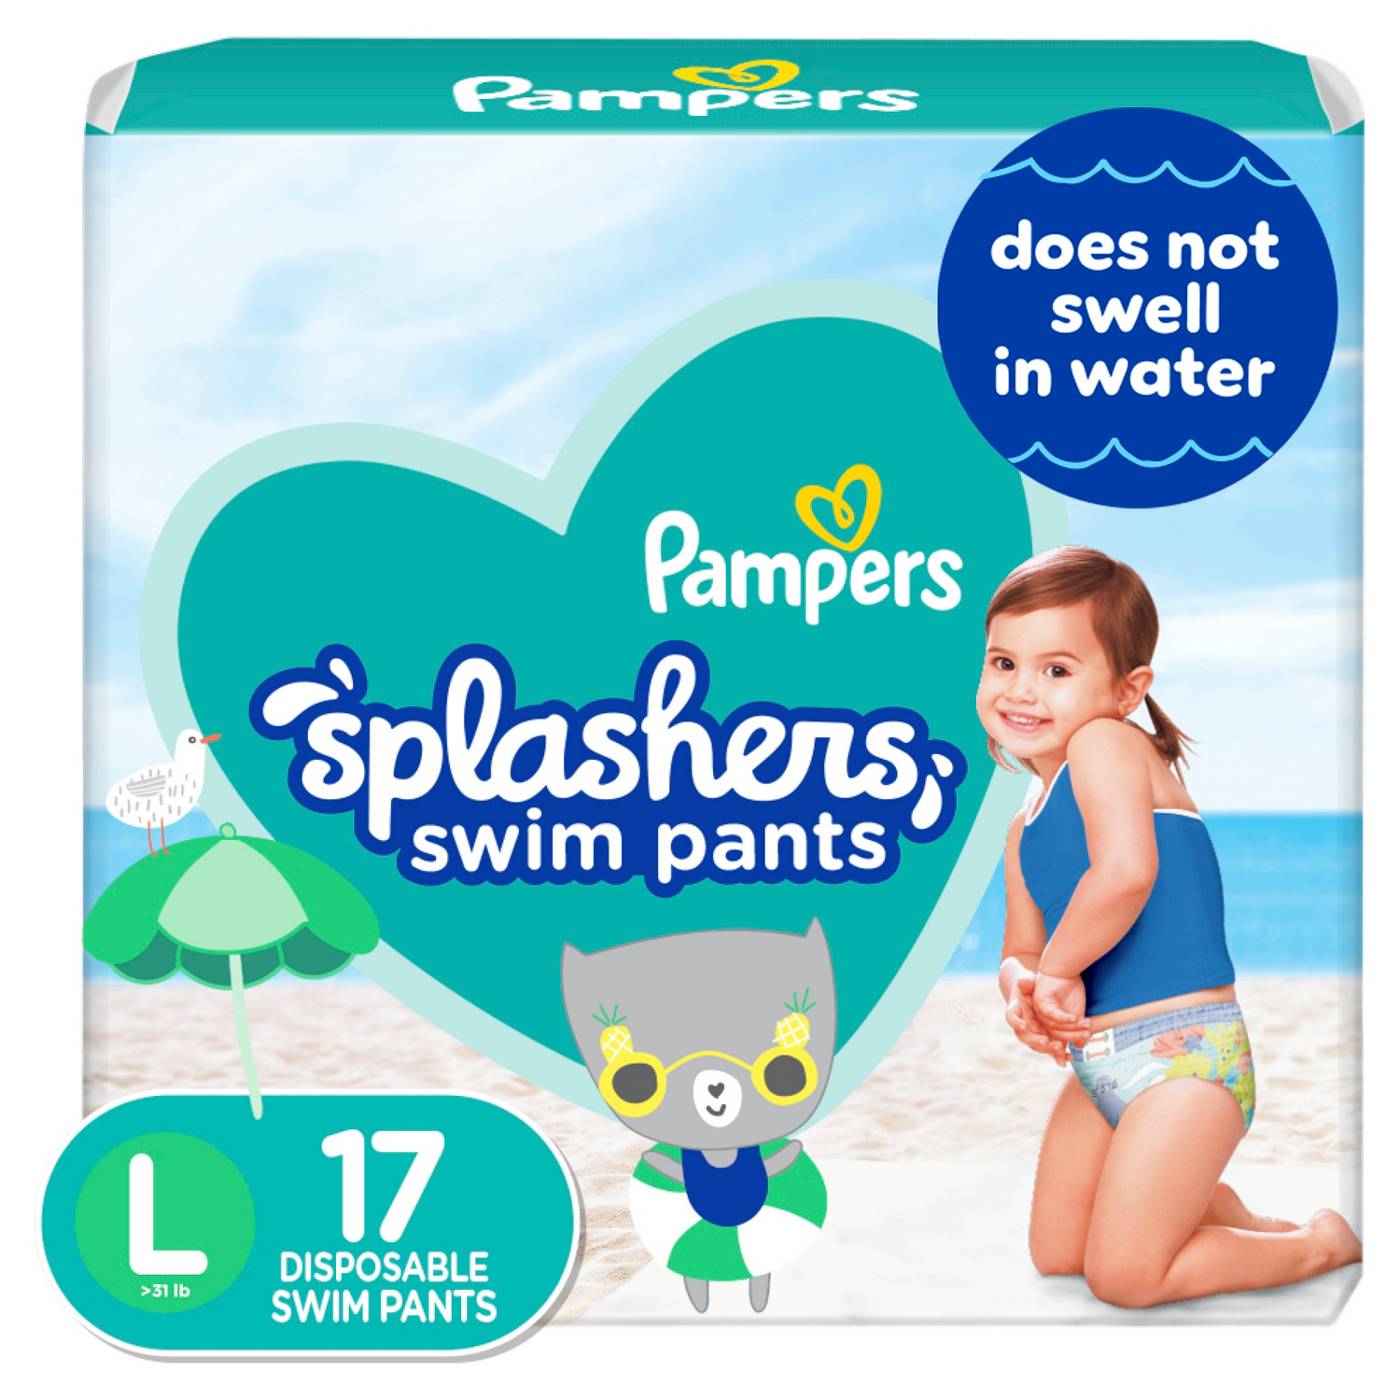 Pampers Swaddlers Baby Diapers - Newborn - Shop Diapers at H-E-B